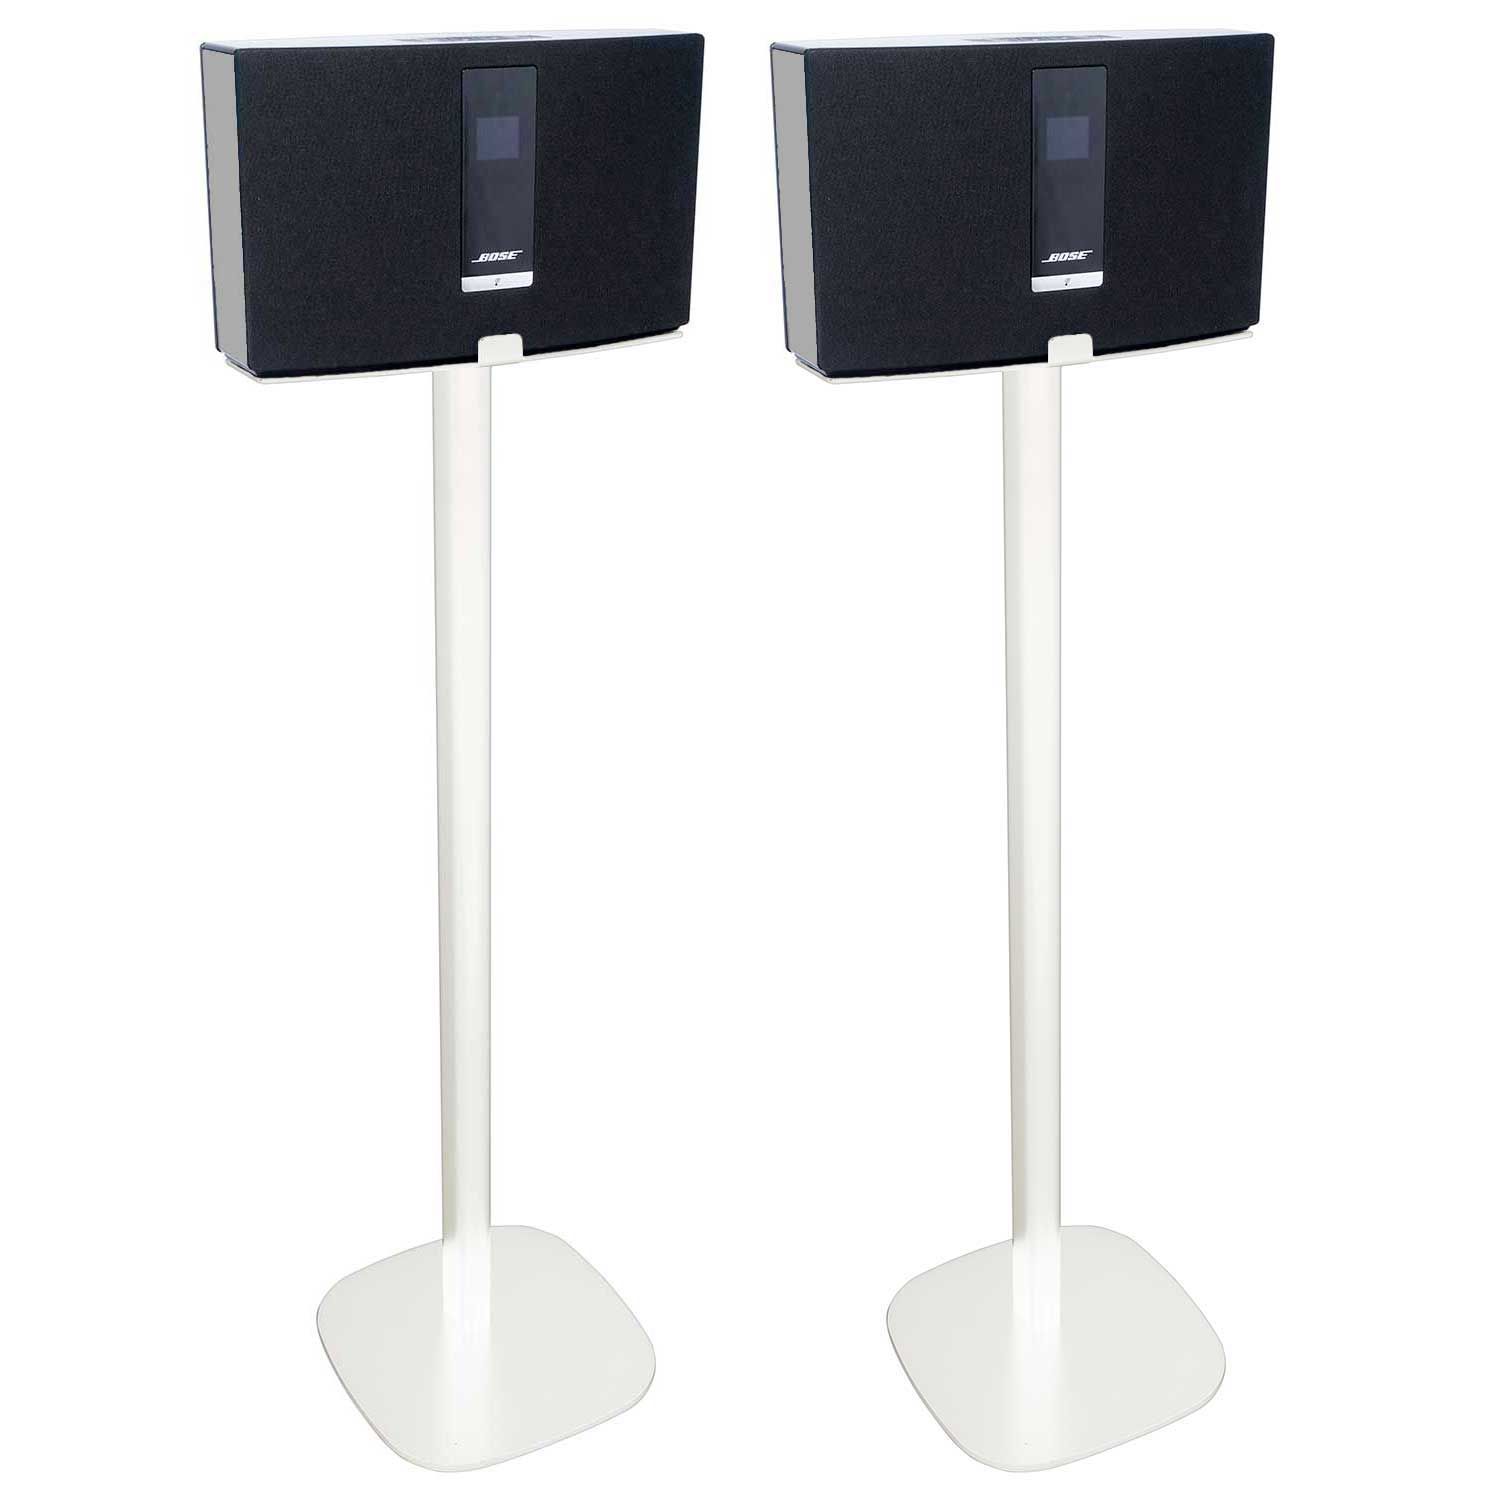 Vebos floor stand Bose Soundtouch 20 white set | The floor stand